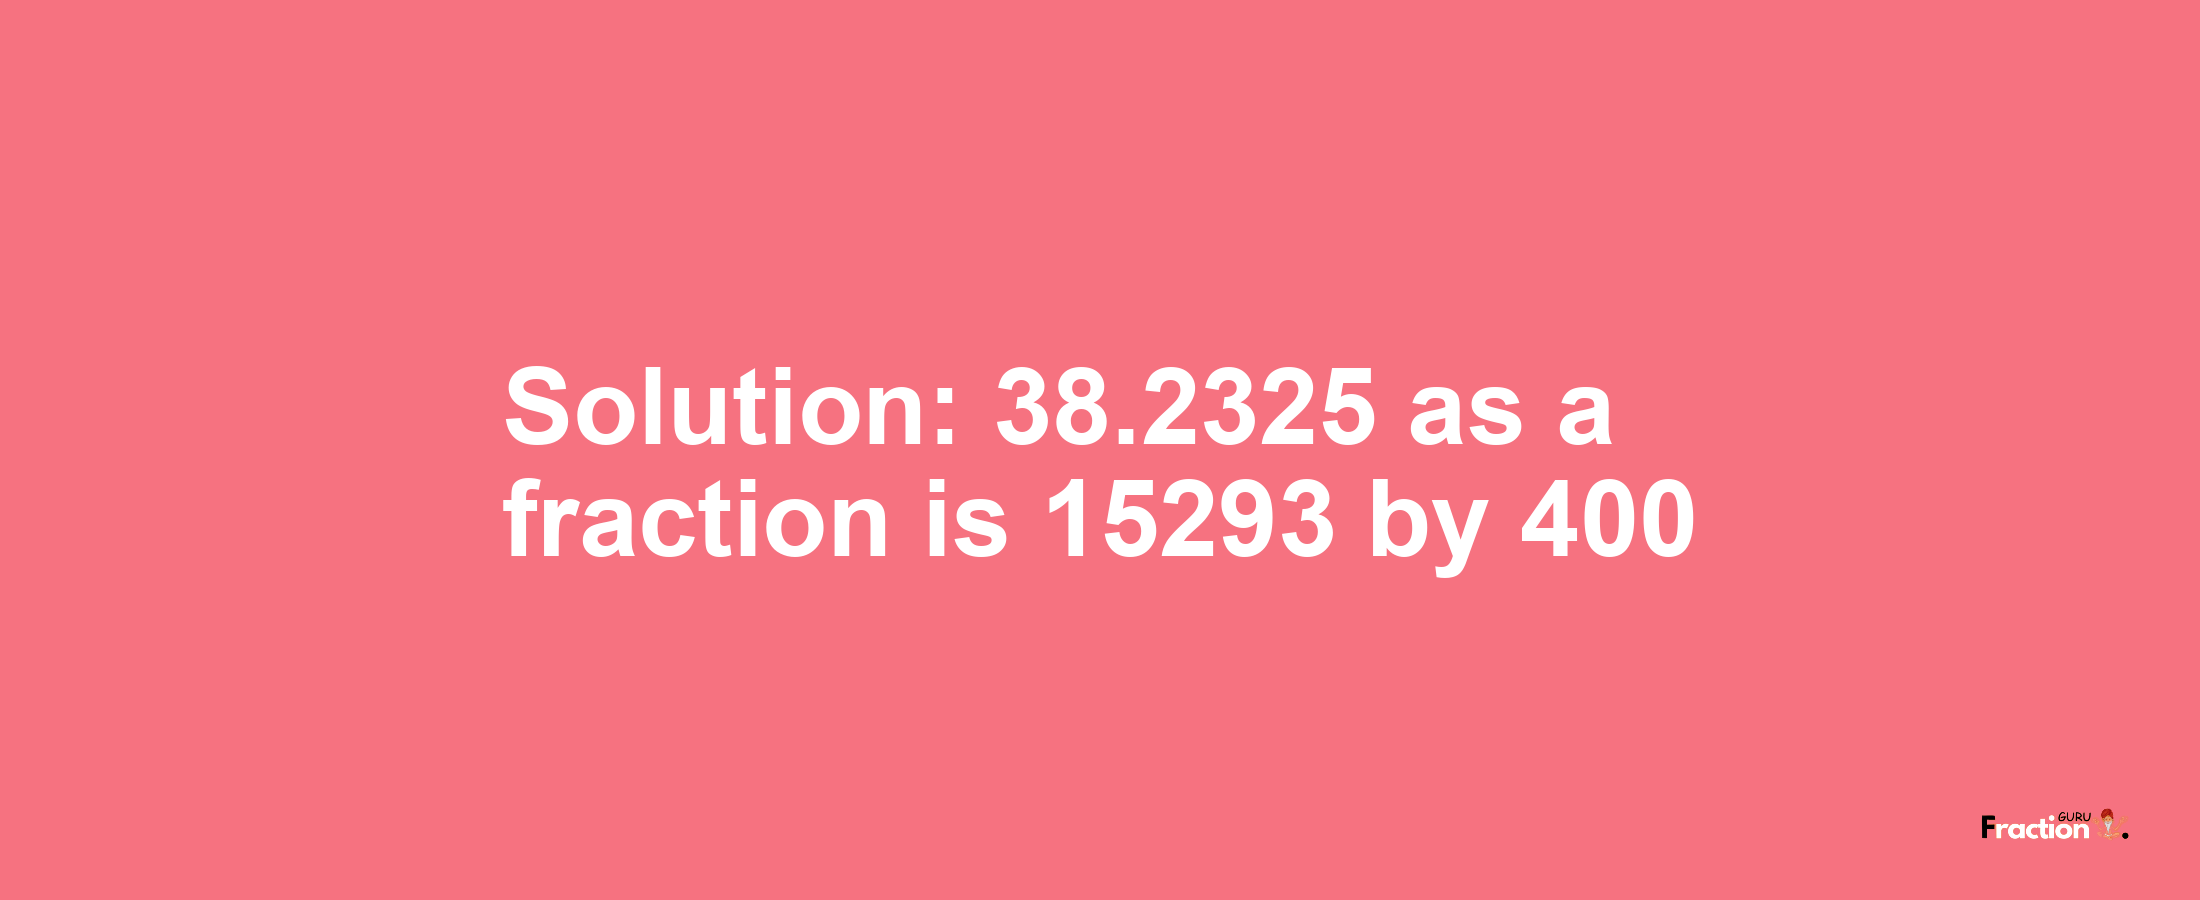 Solution:38.2325 as a fraction is 15293/400